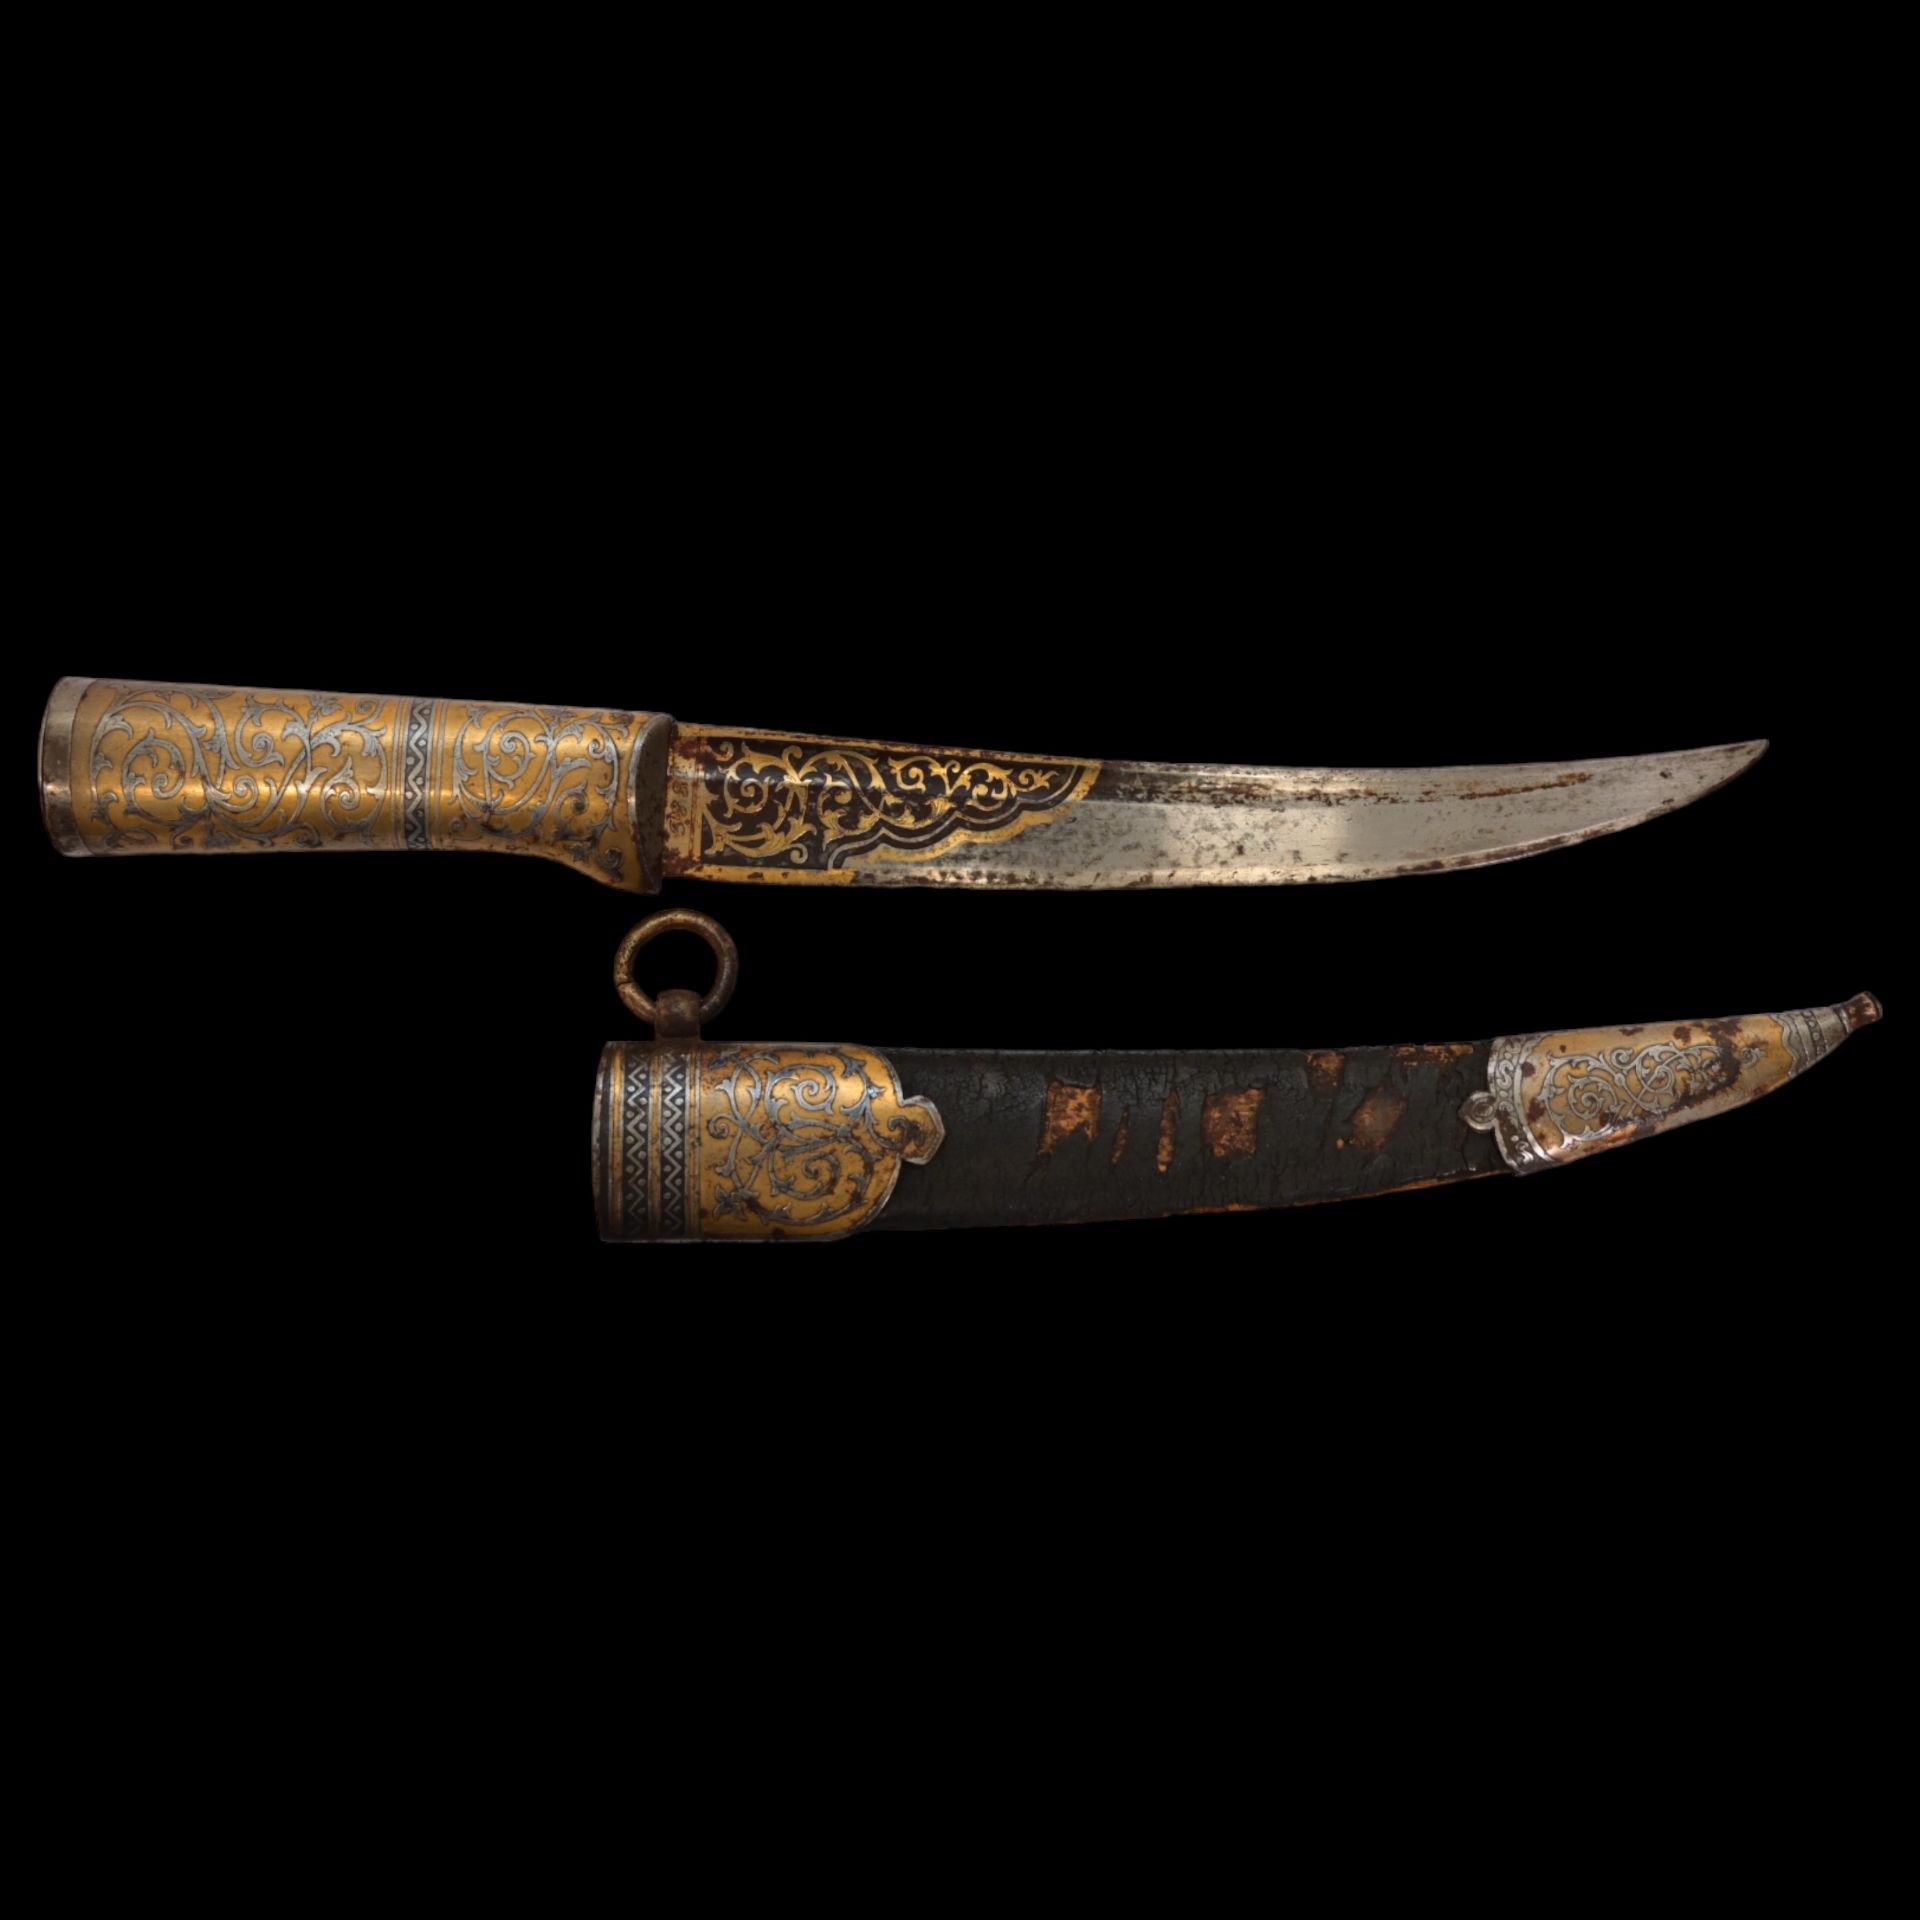 RARE HUNTING KNIFE, DECORATED WITH GOLD AND BLUE, RUSSIAN EMPIRE, ZLATOUST, 1889. - Image 17 of 26